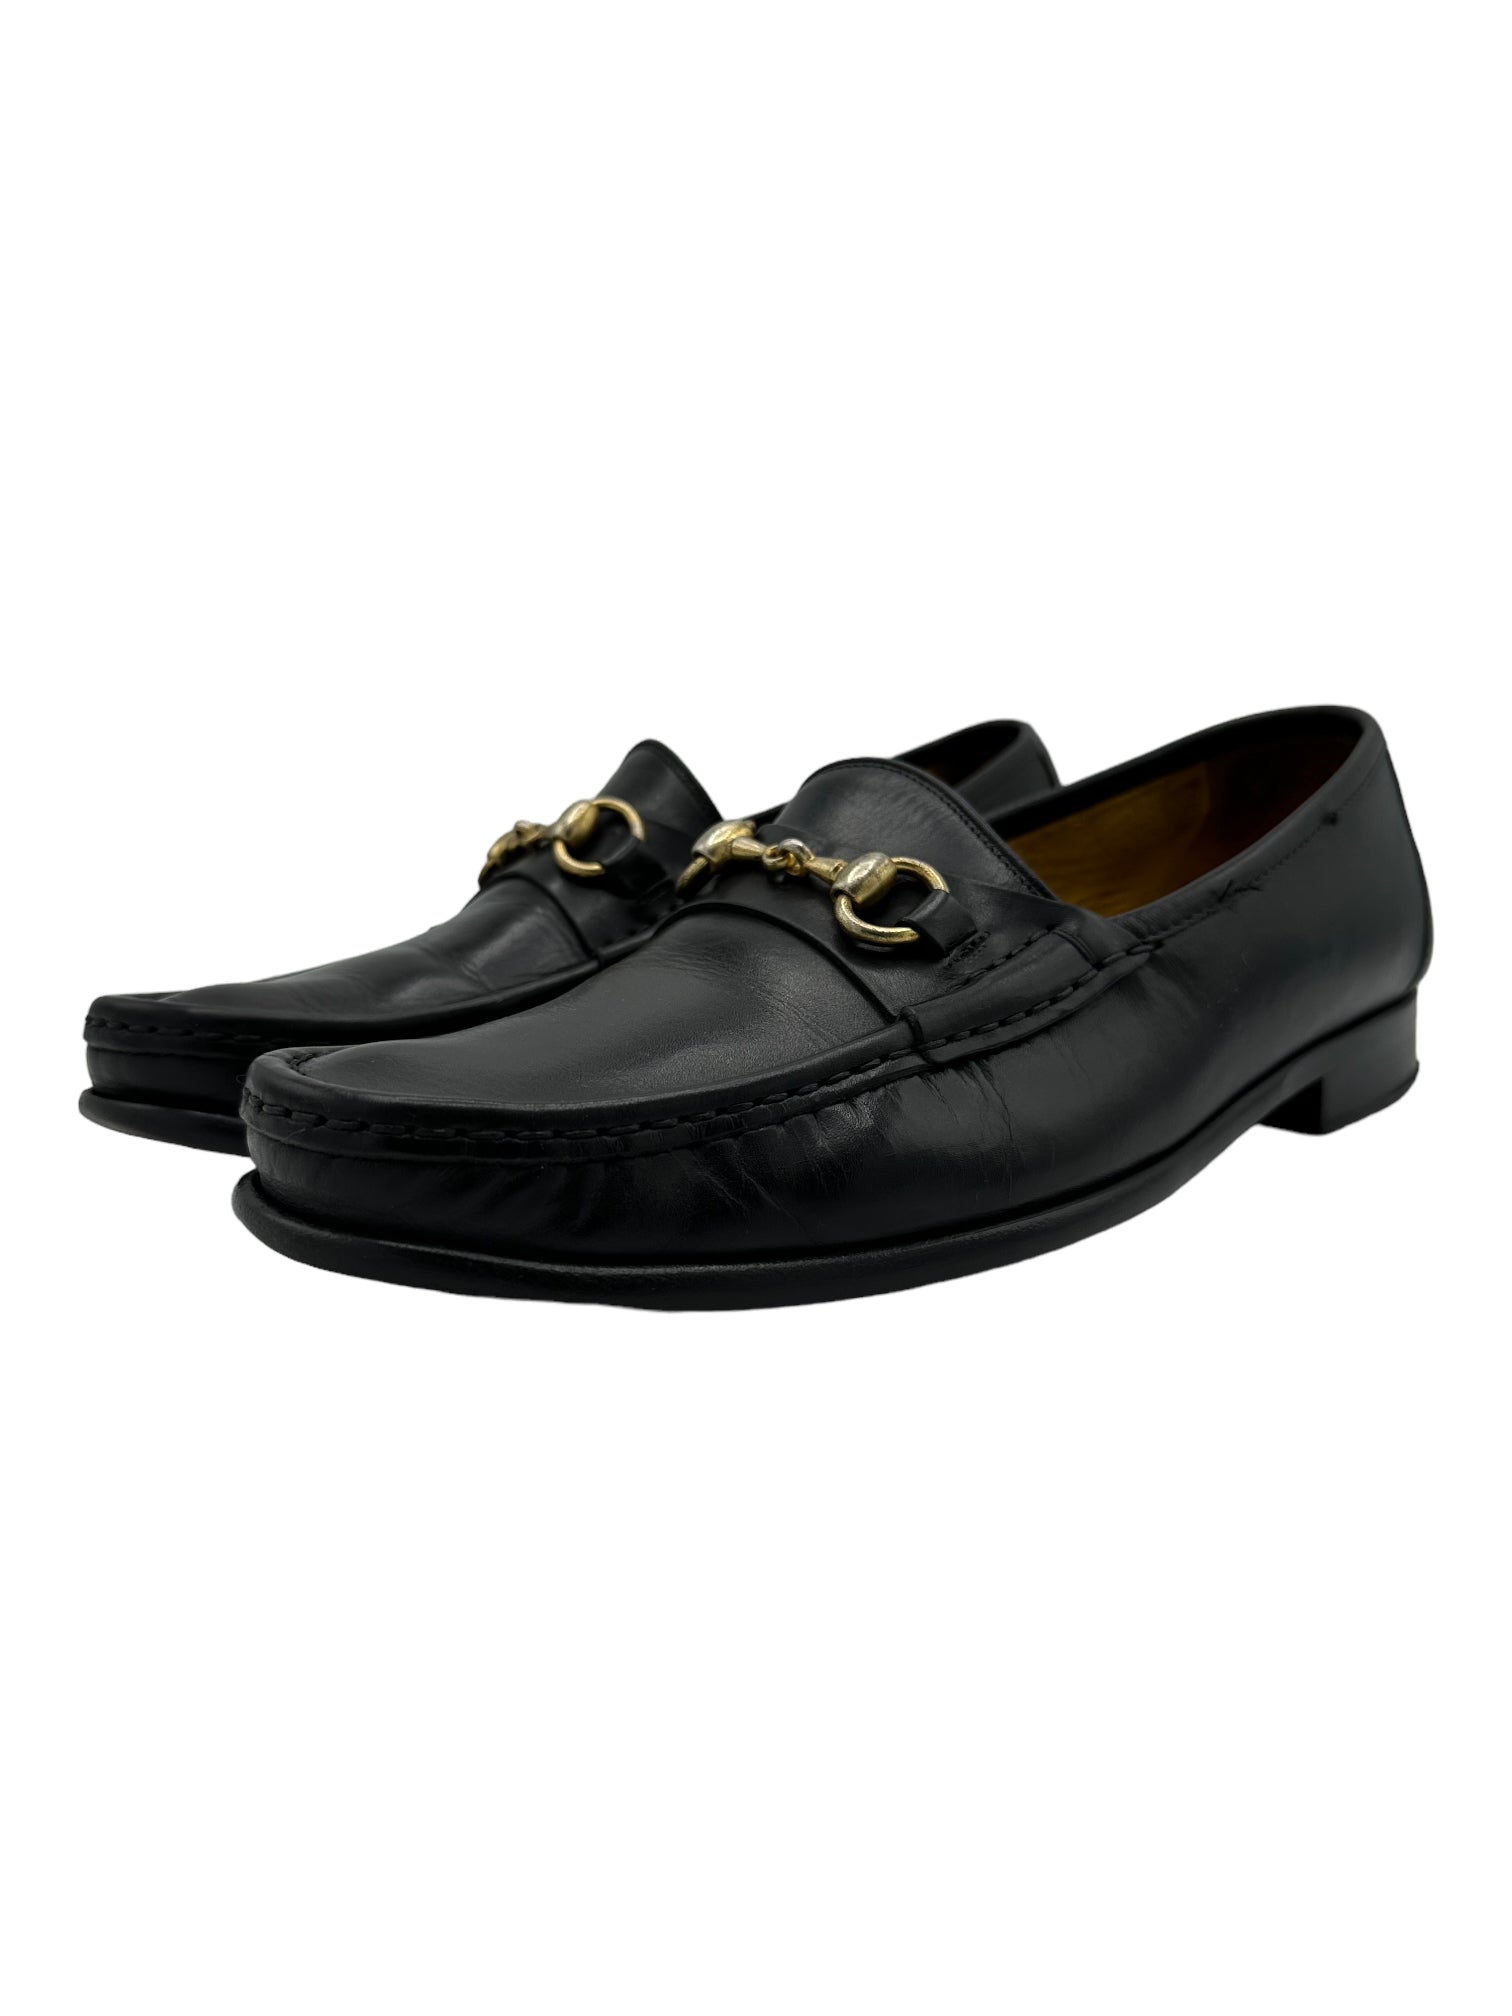 Cole Haan Black Ascot Leather Bit Loafers - Genuine Design Luxury Consignment for Men. New & Pre-Owned Clothing, Shoes, & Accessories. Calgary, Canada